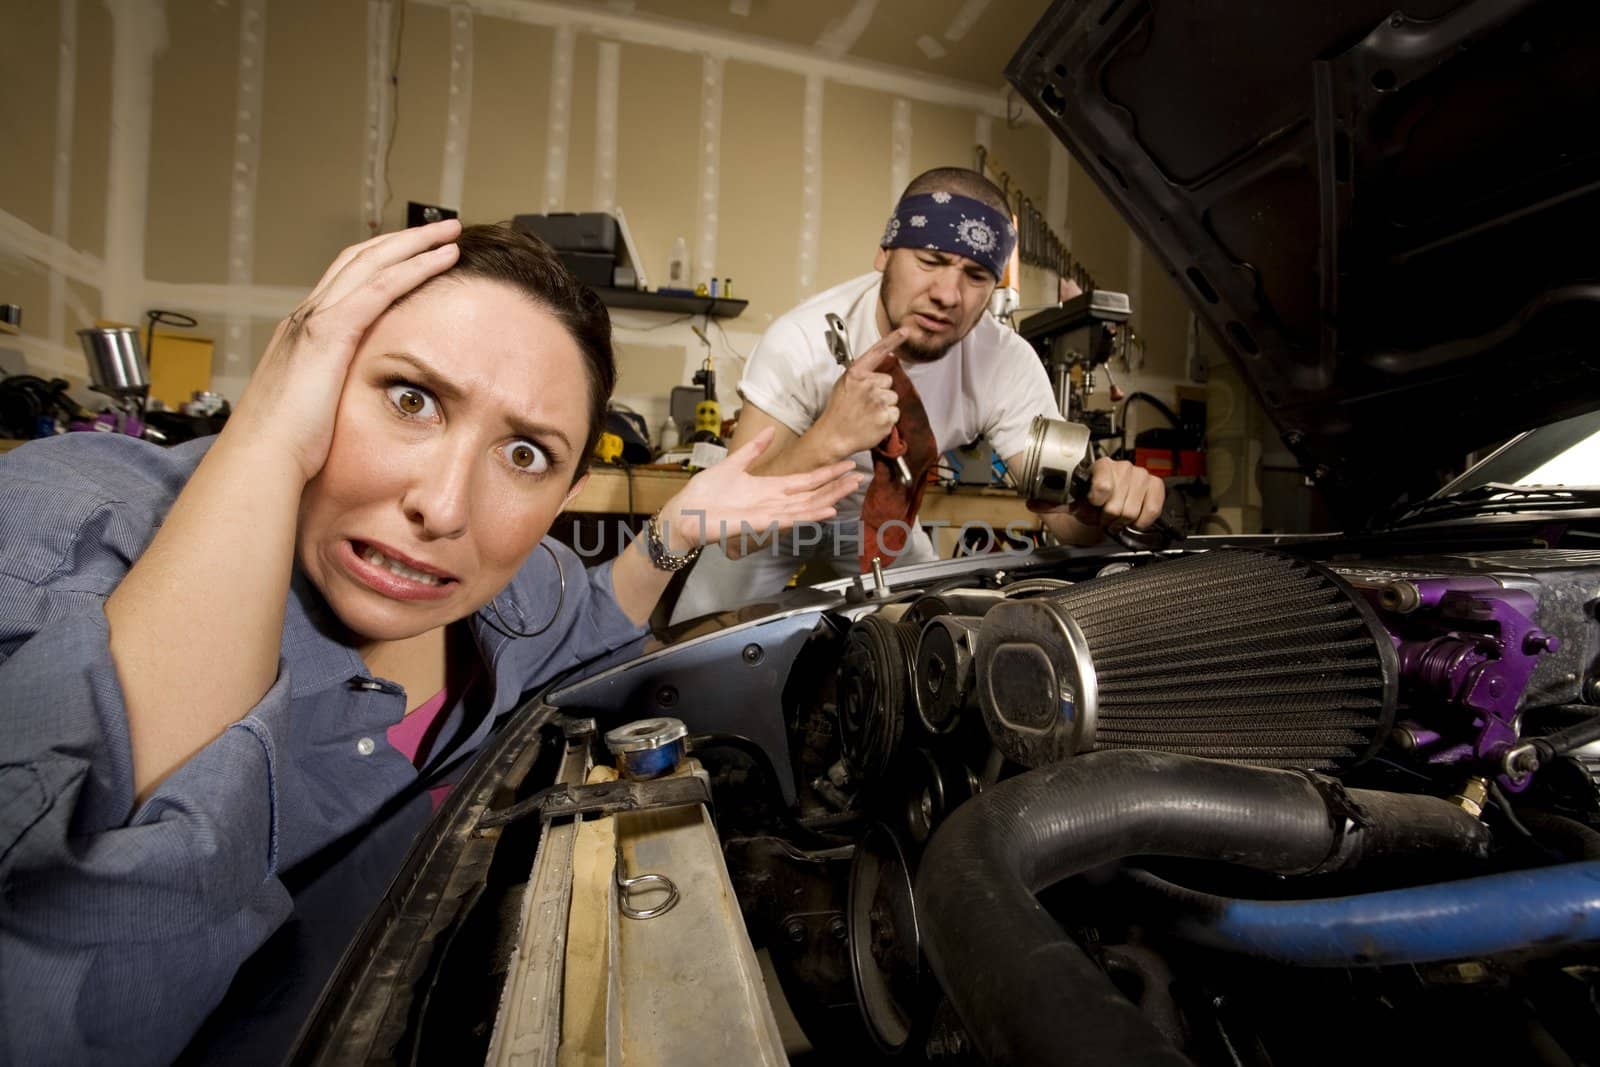 Frustrated woman leaning on car with incompetent male mechanic in background